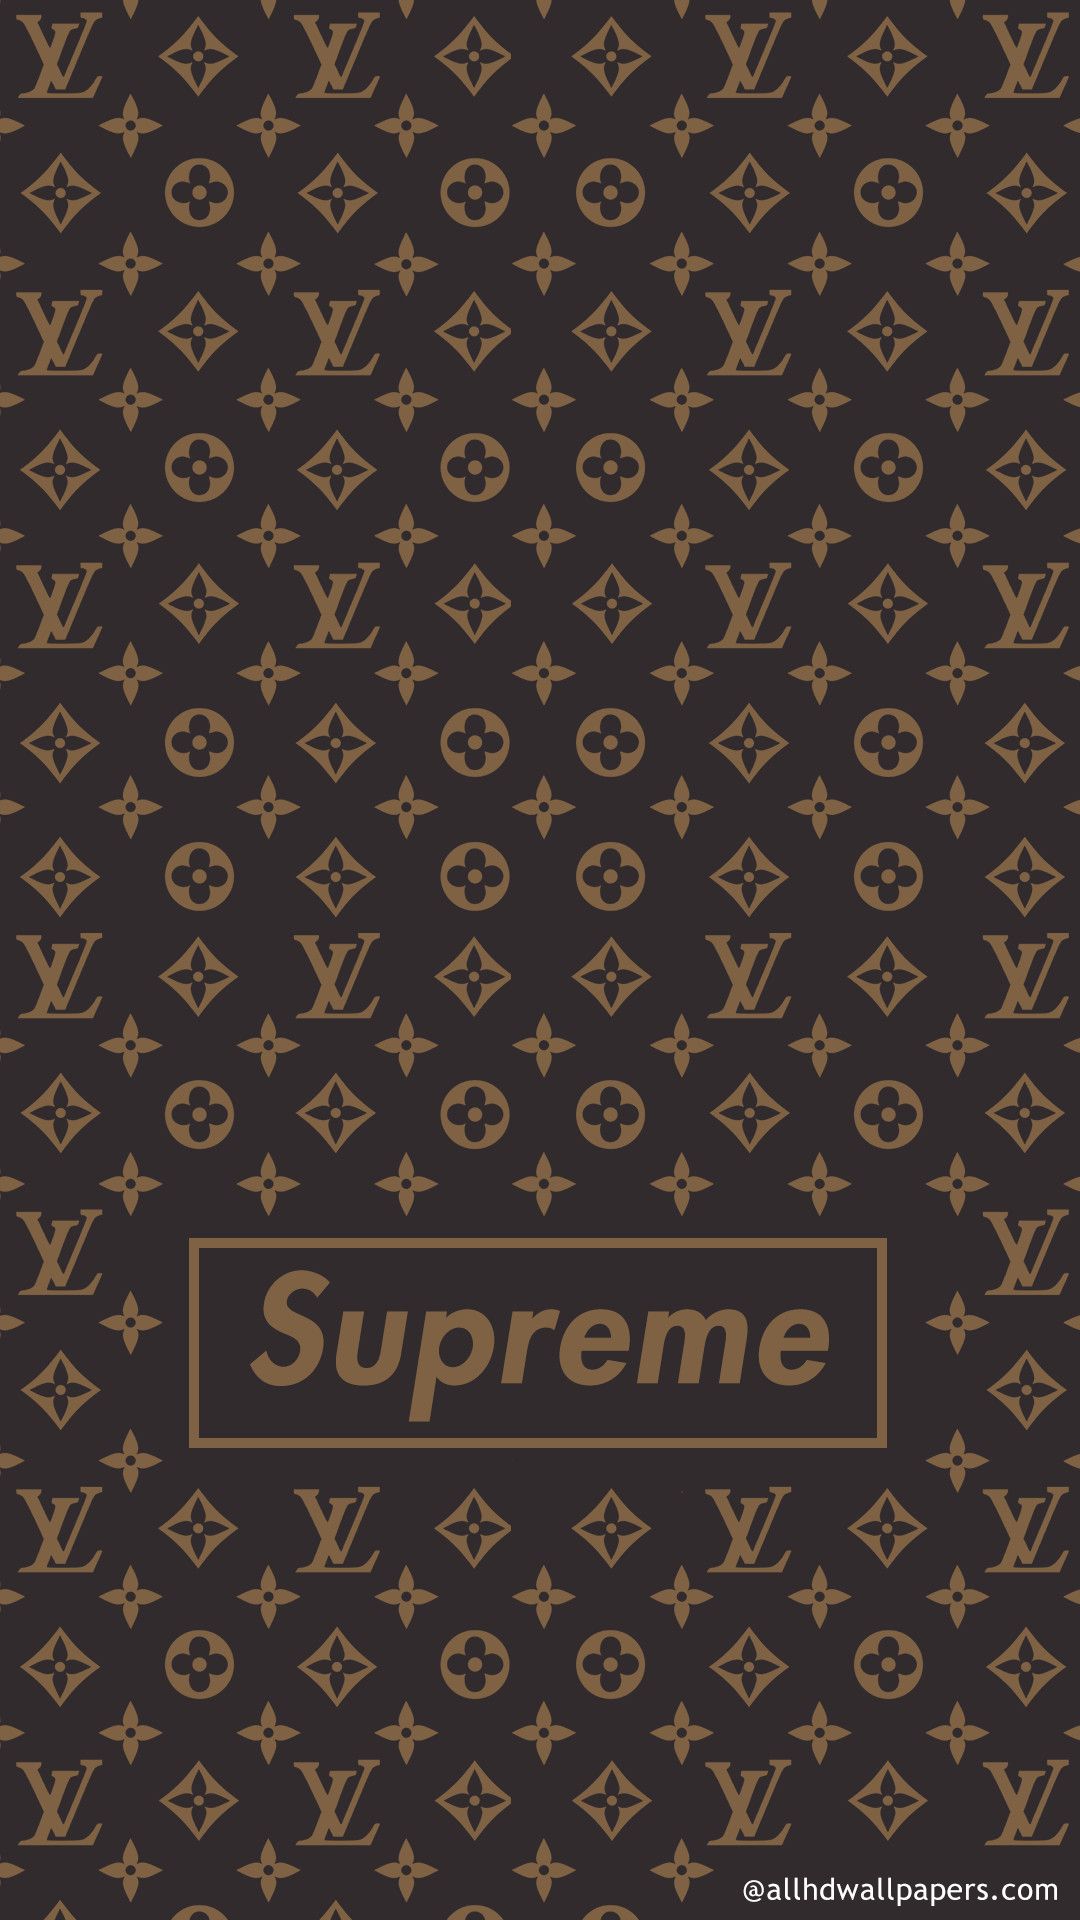 Supreme Iphone X Wallpapers